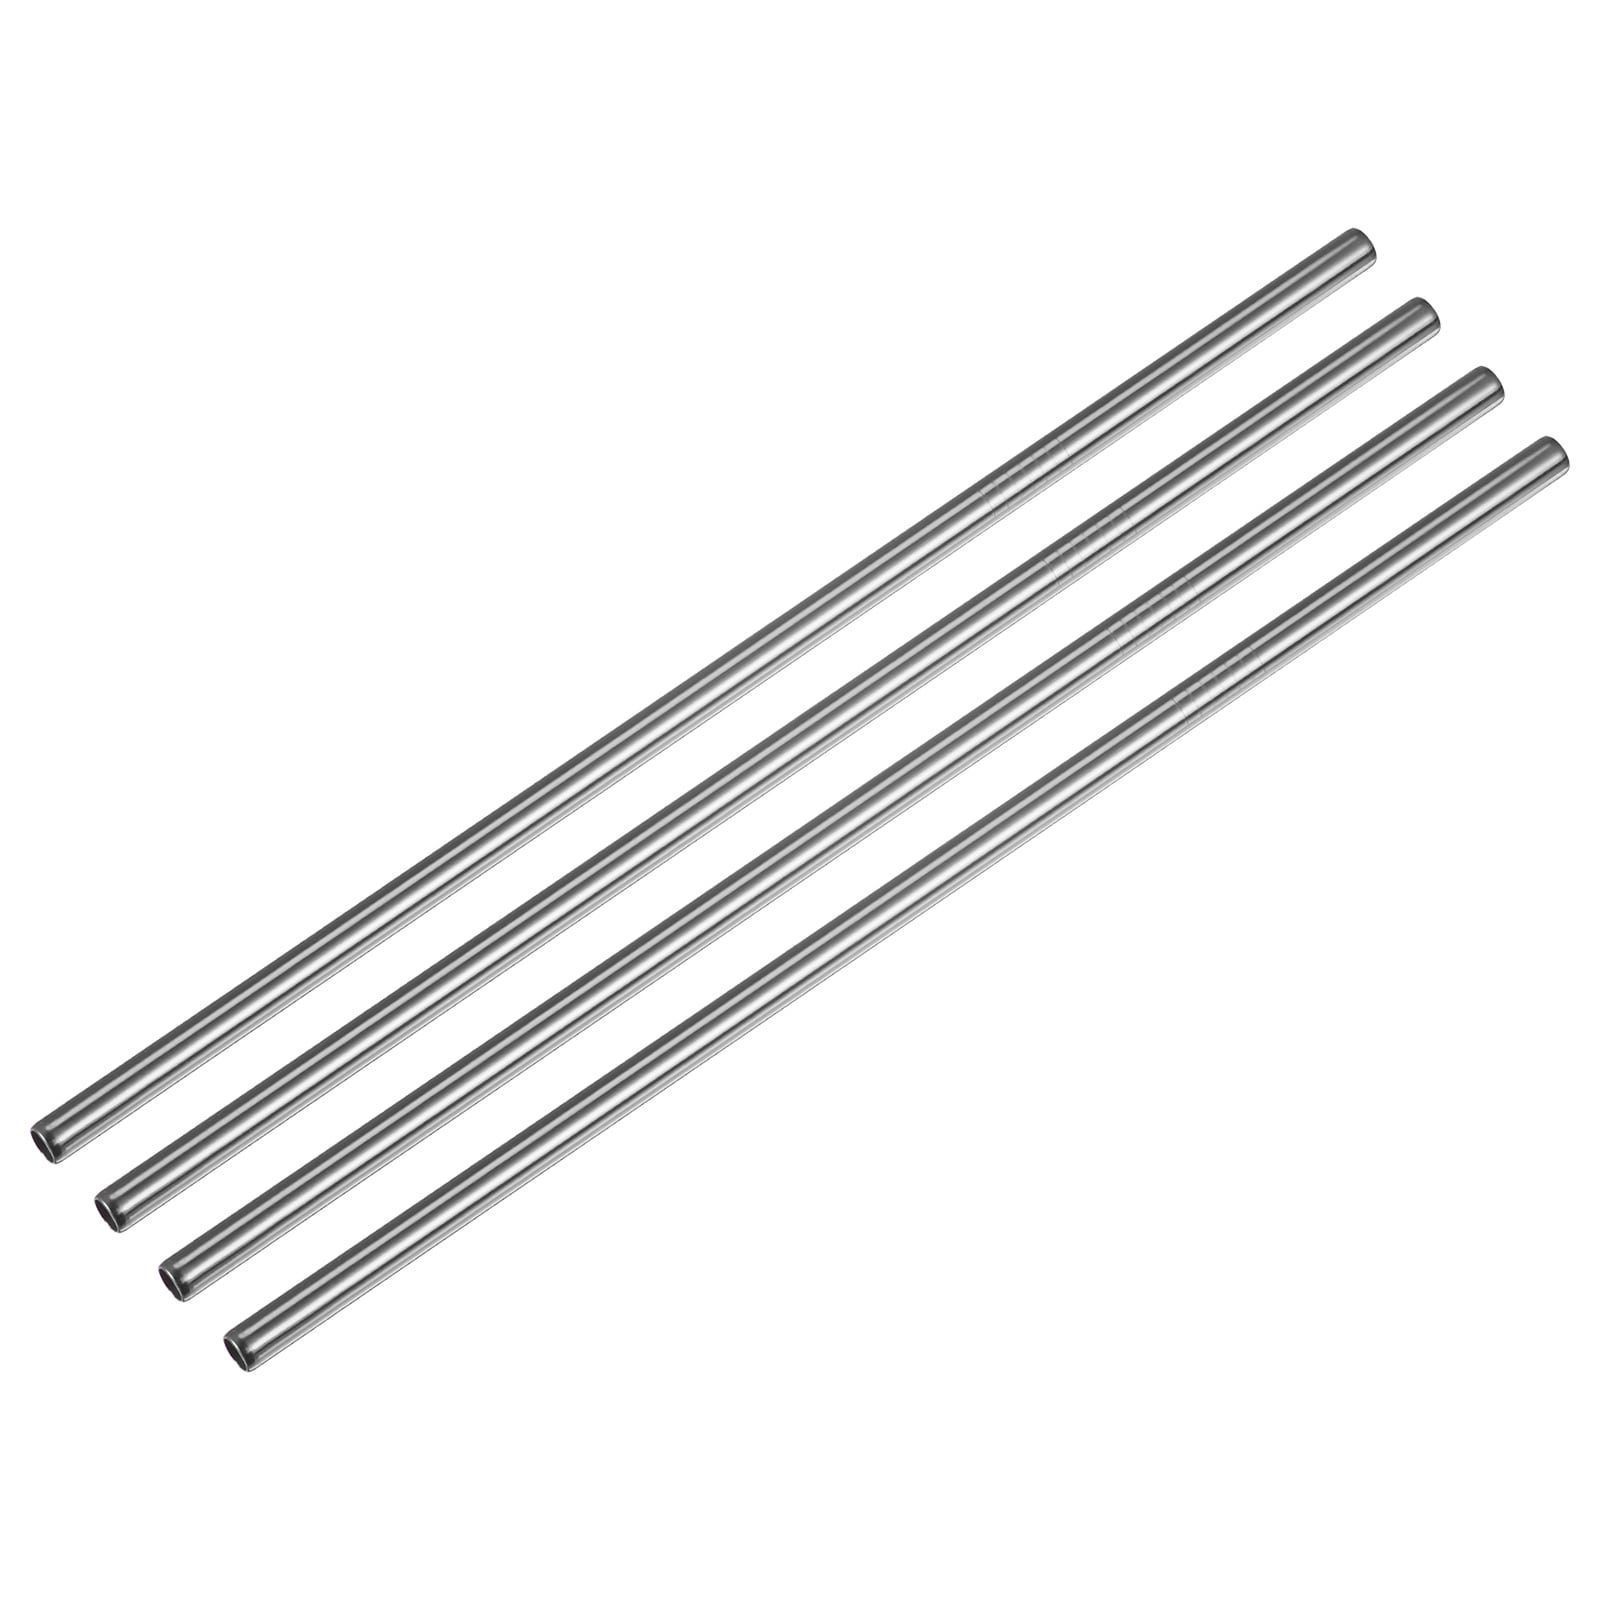 13 Inch Long Flexible Reusable Straws with Natural (Clear) Straw Caps - Set  of 10 - Free Shipping